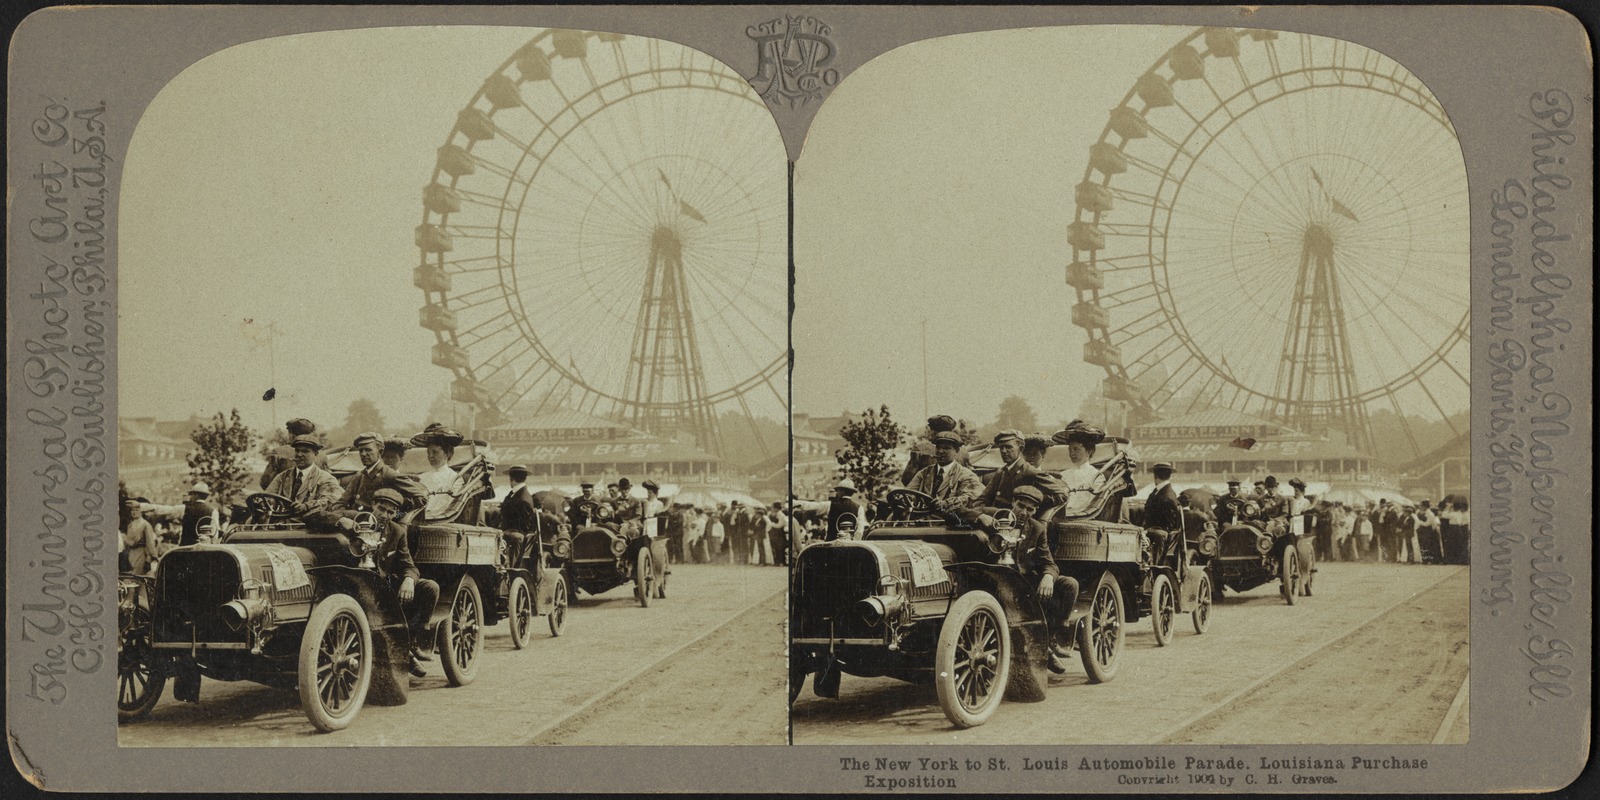 The New York to St. Louis automobile parade. Louisiana Purchase Exposition